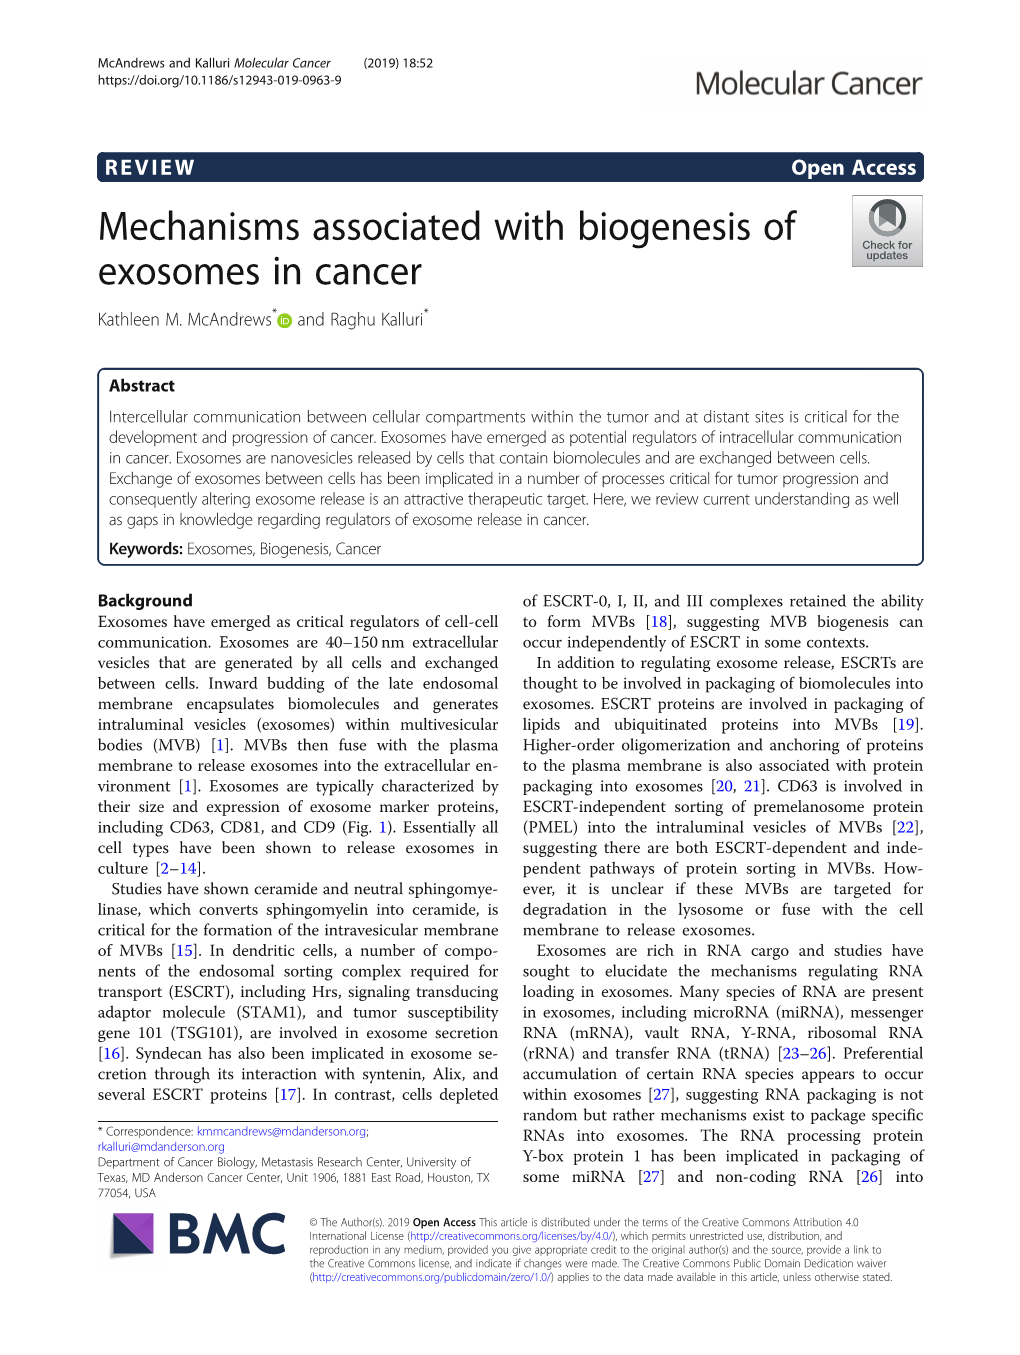 VIEW Open Access Mechanisms Associated with Biogenesis of Exosomes in Cancer Kathleen M